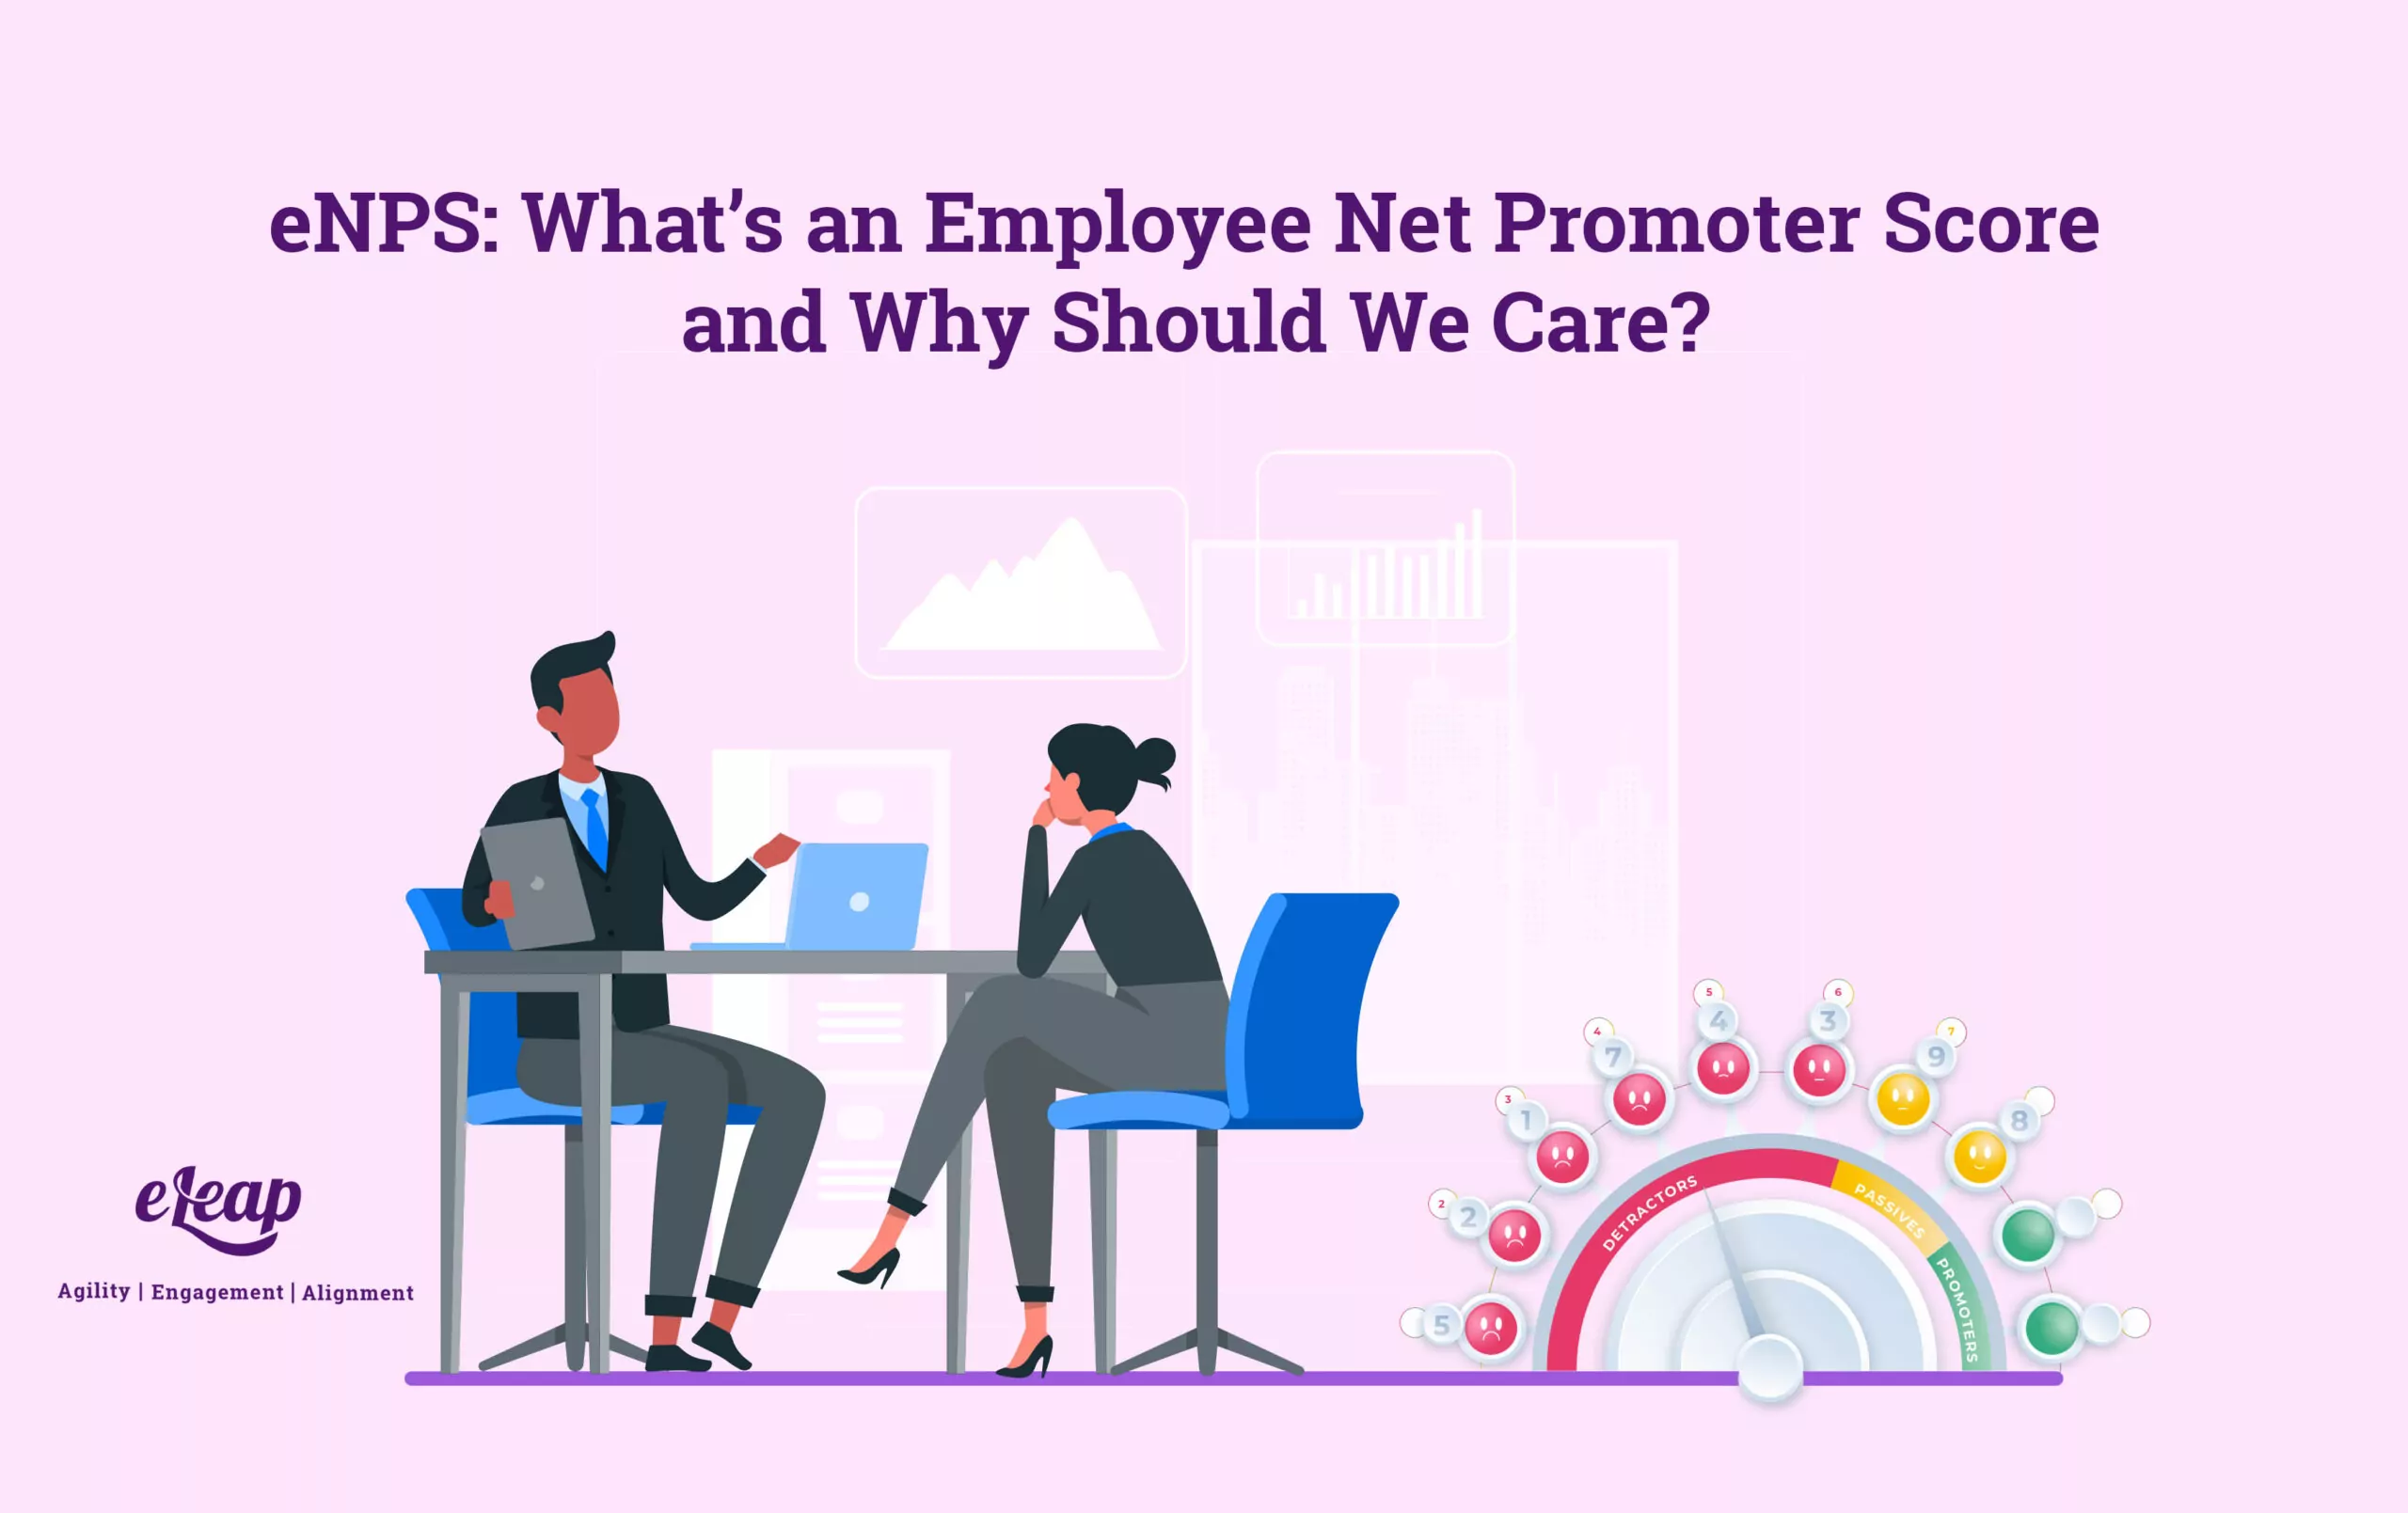 eNPS: What’s an Employee Net Promoter Score and Why Should We Care?